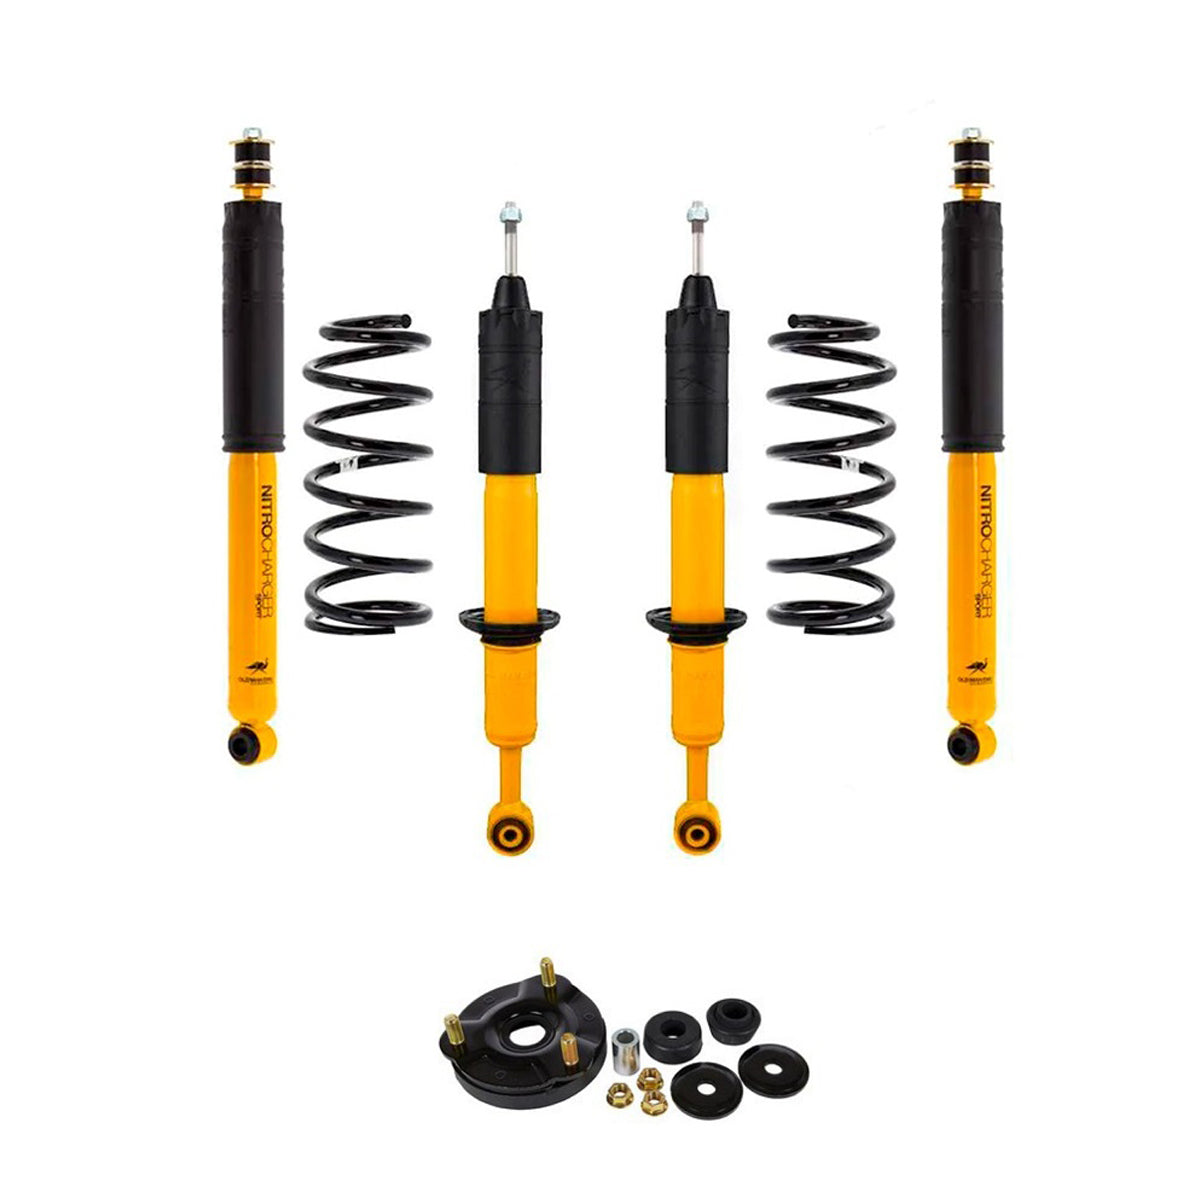 A OME 2 inch Essentials Lift Kit for Tacoma (05-15) - Front Shocks Assembly, providing increased ground clearance.